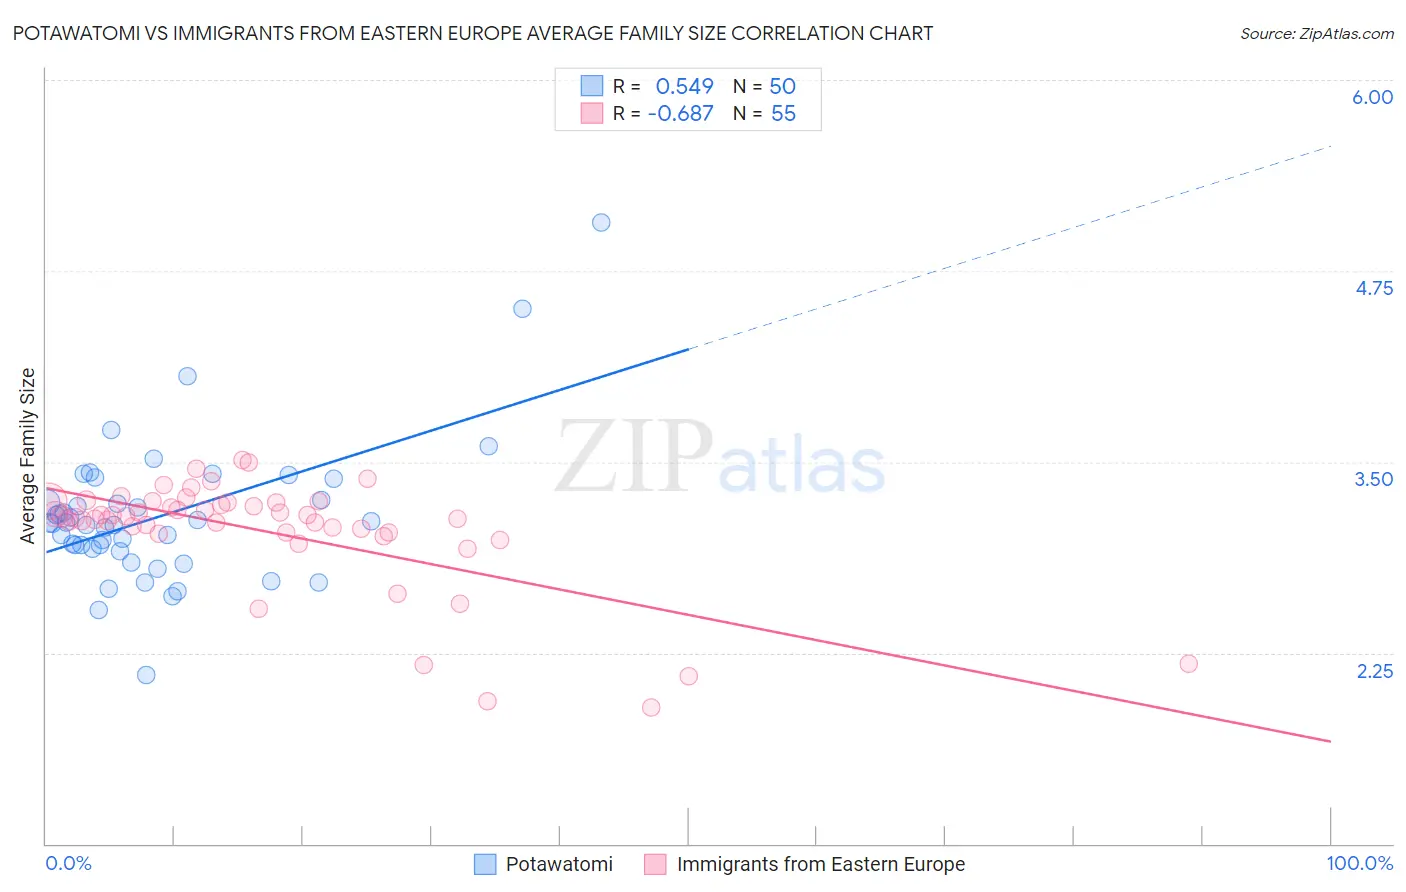 Potawatomi vs Immigrants from Eastern Europe Average Family Size